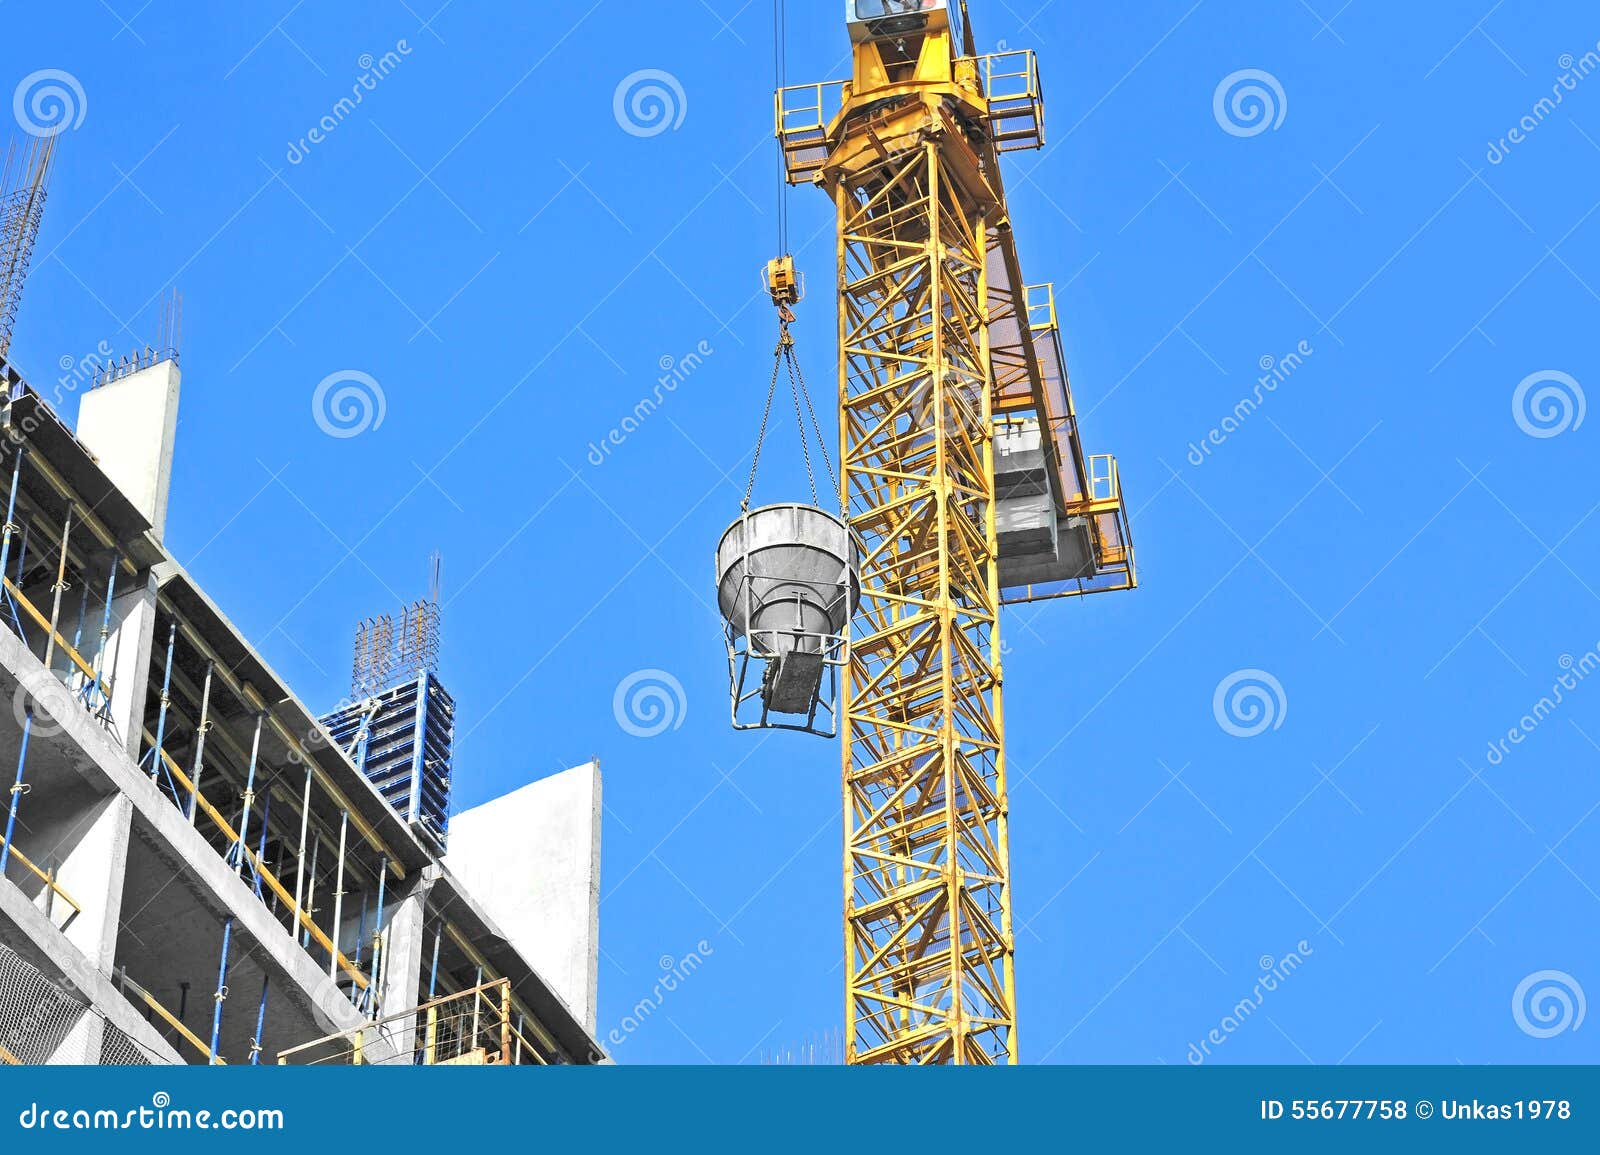 Crane Lifting Cement Mixing Container Stock Photo - Image of iron